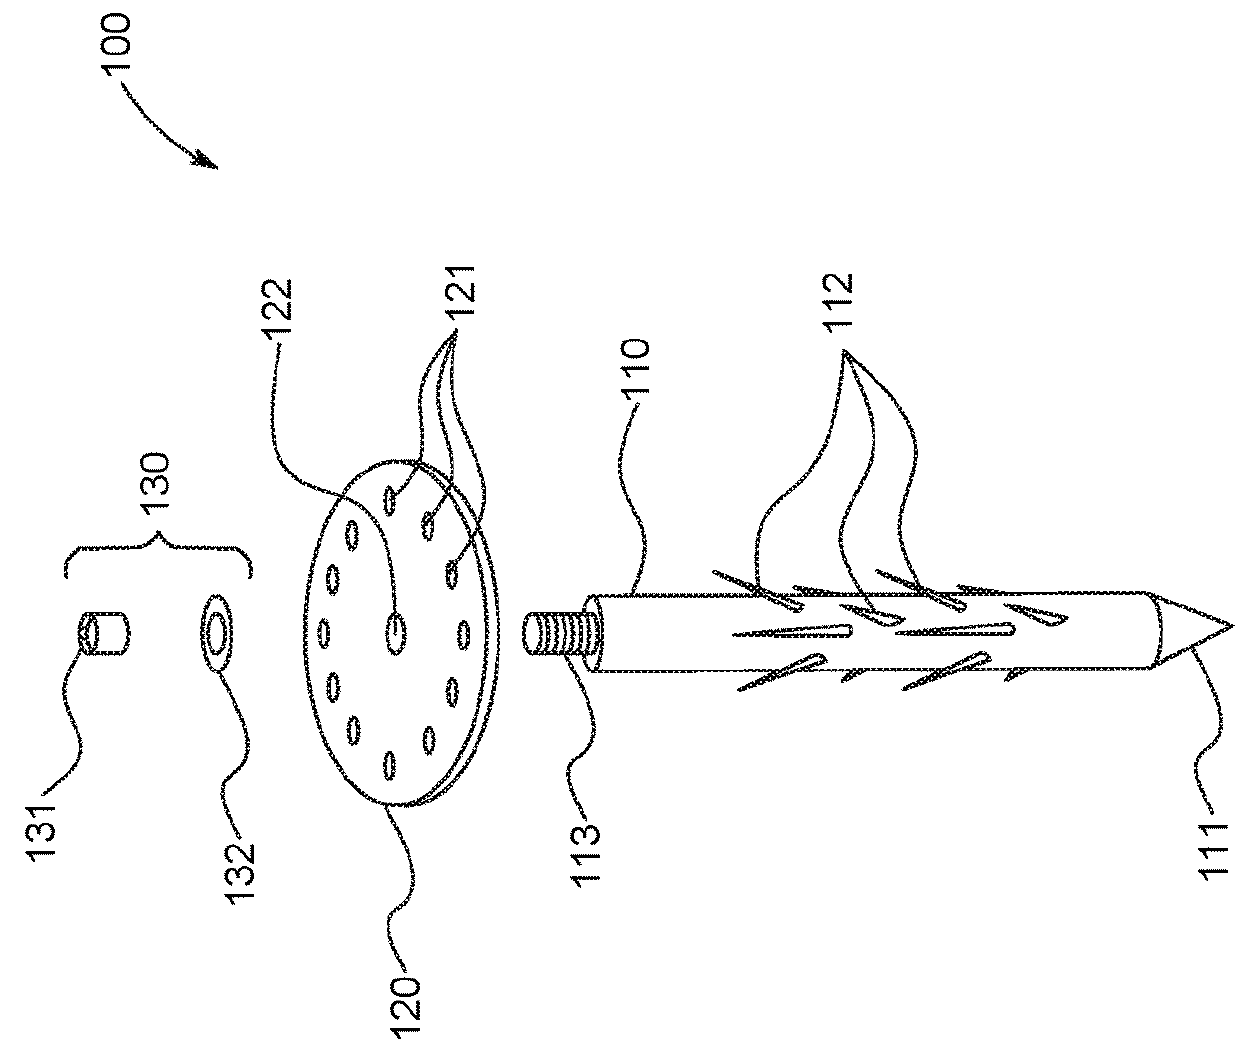 Weed growth suppression device